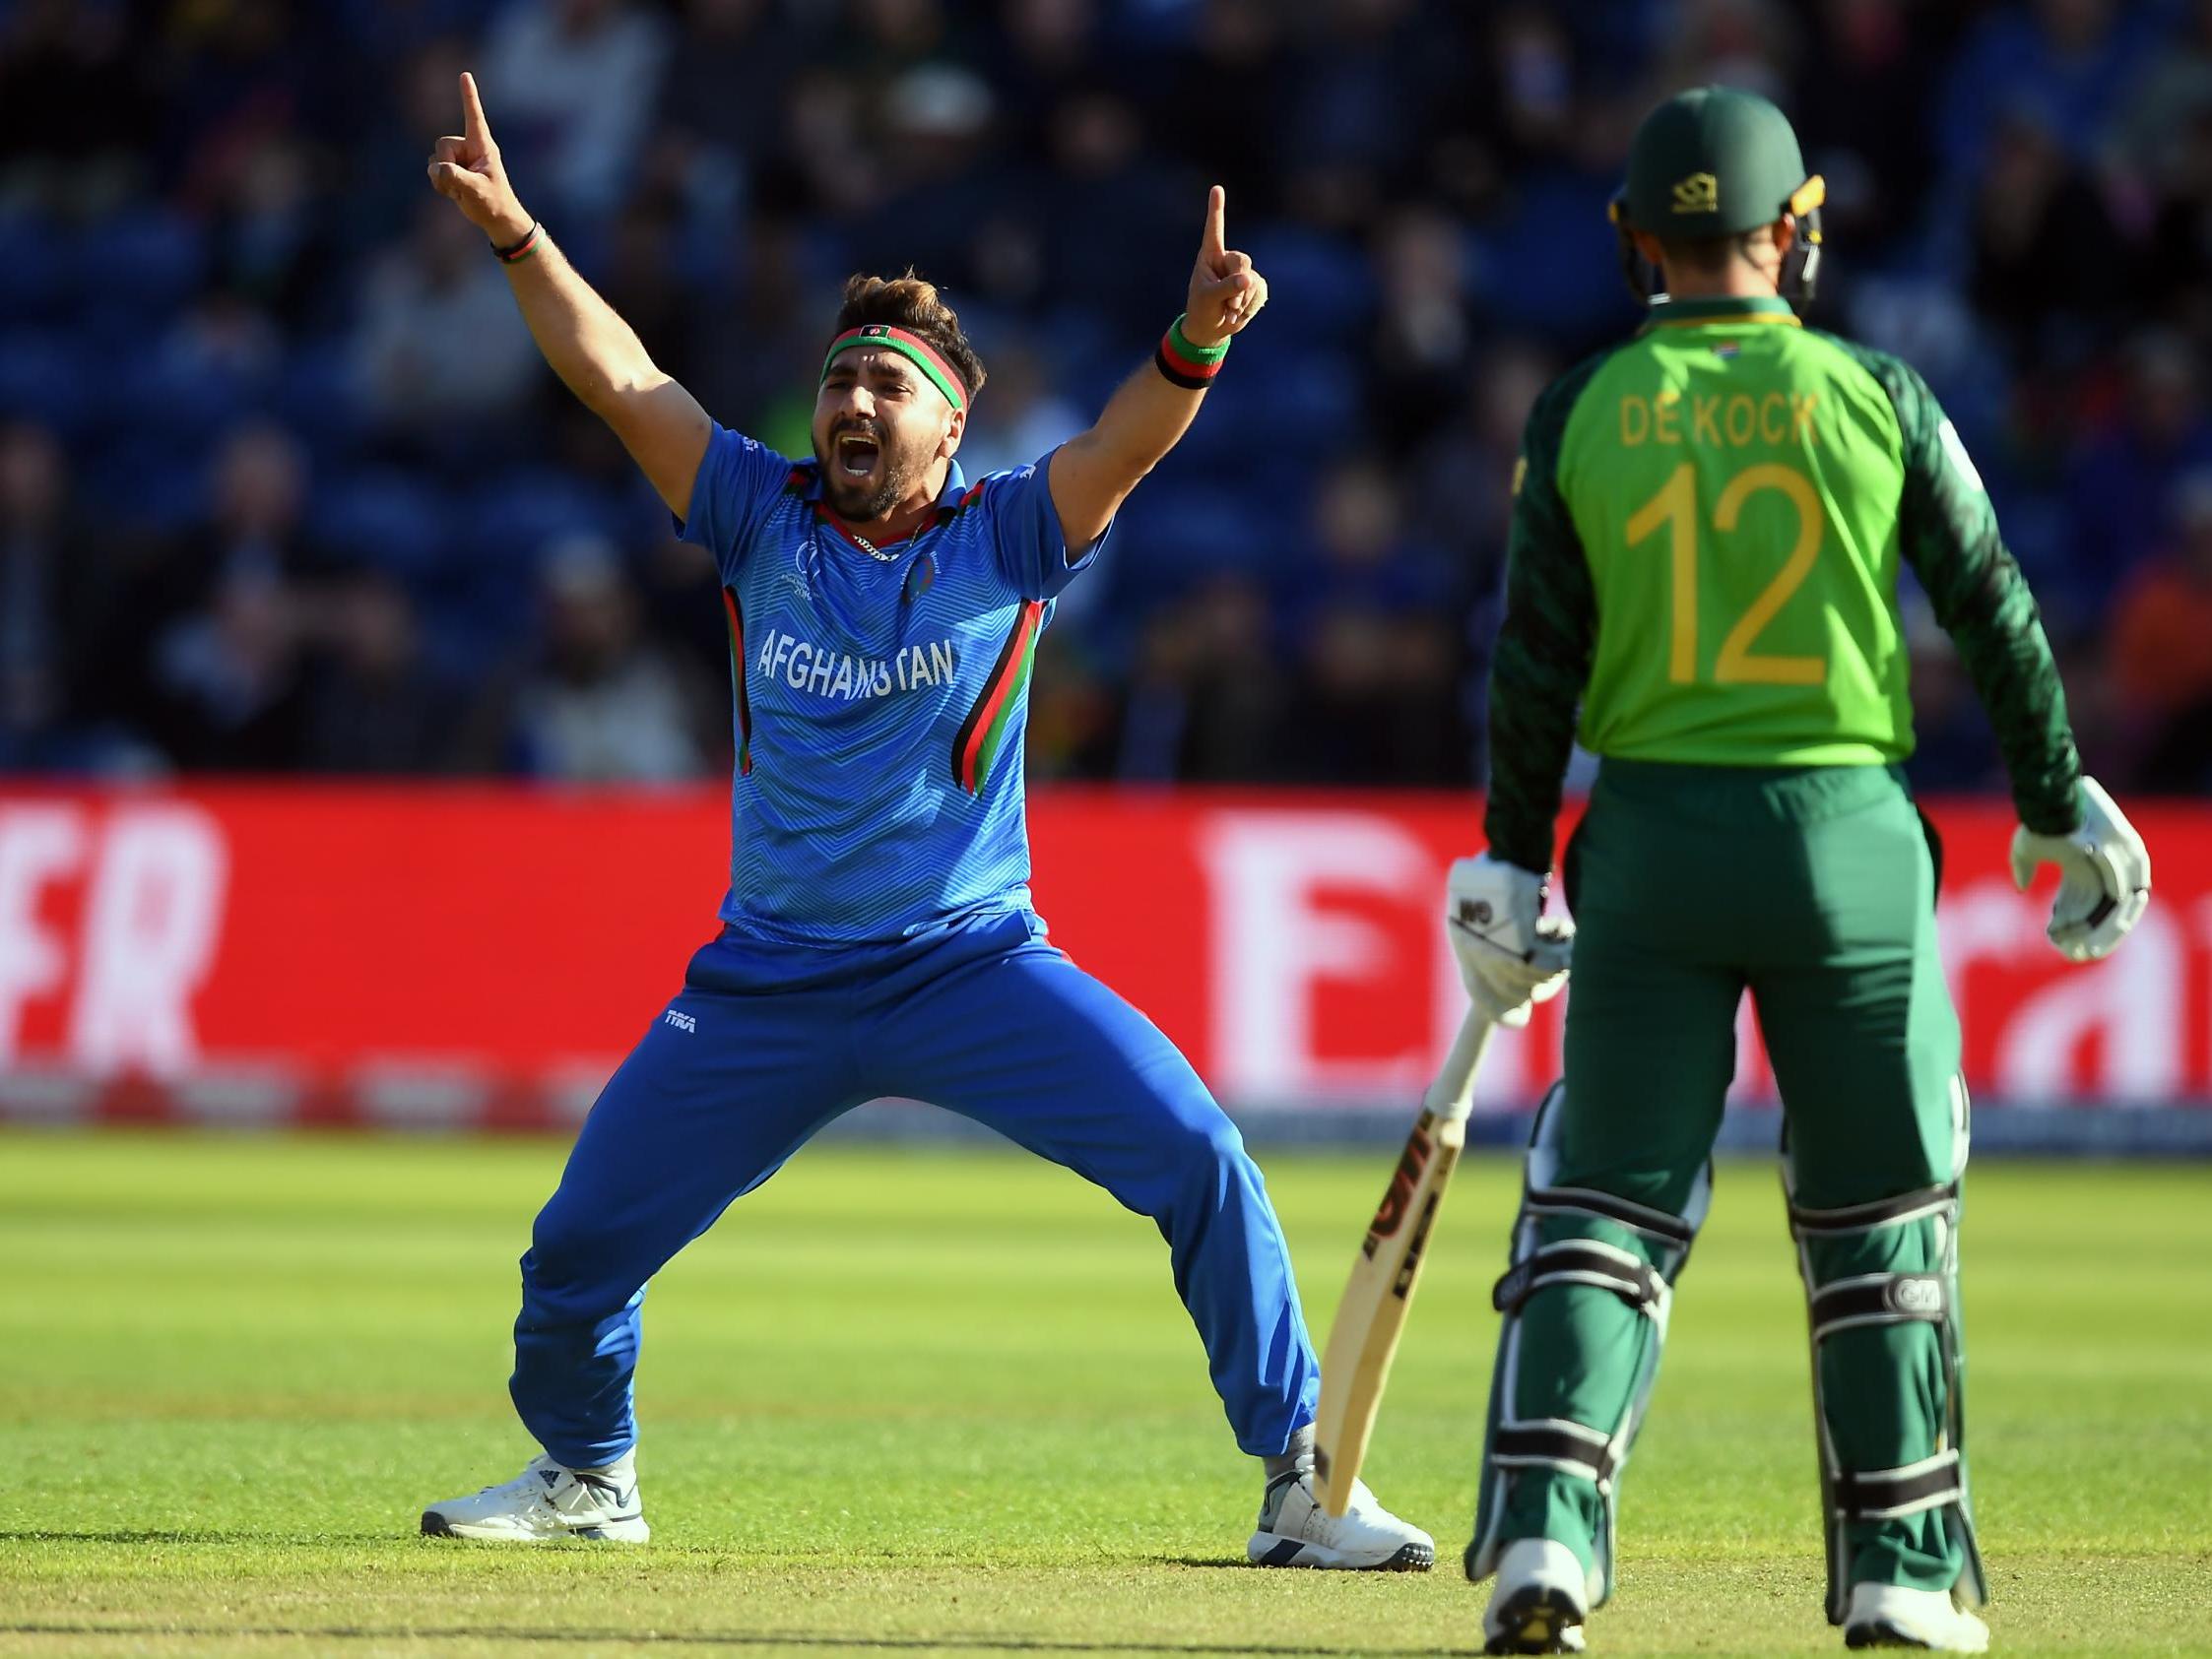 Afghanistan’s Aftab Alam appeals for the wicket of Hashim Amla of South Africa